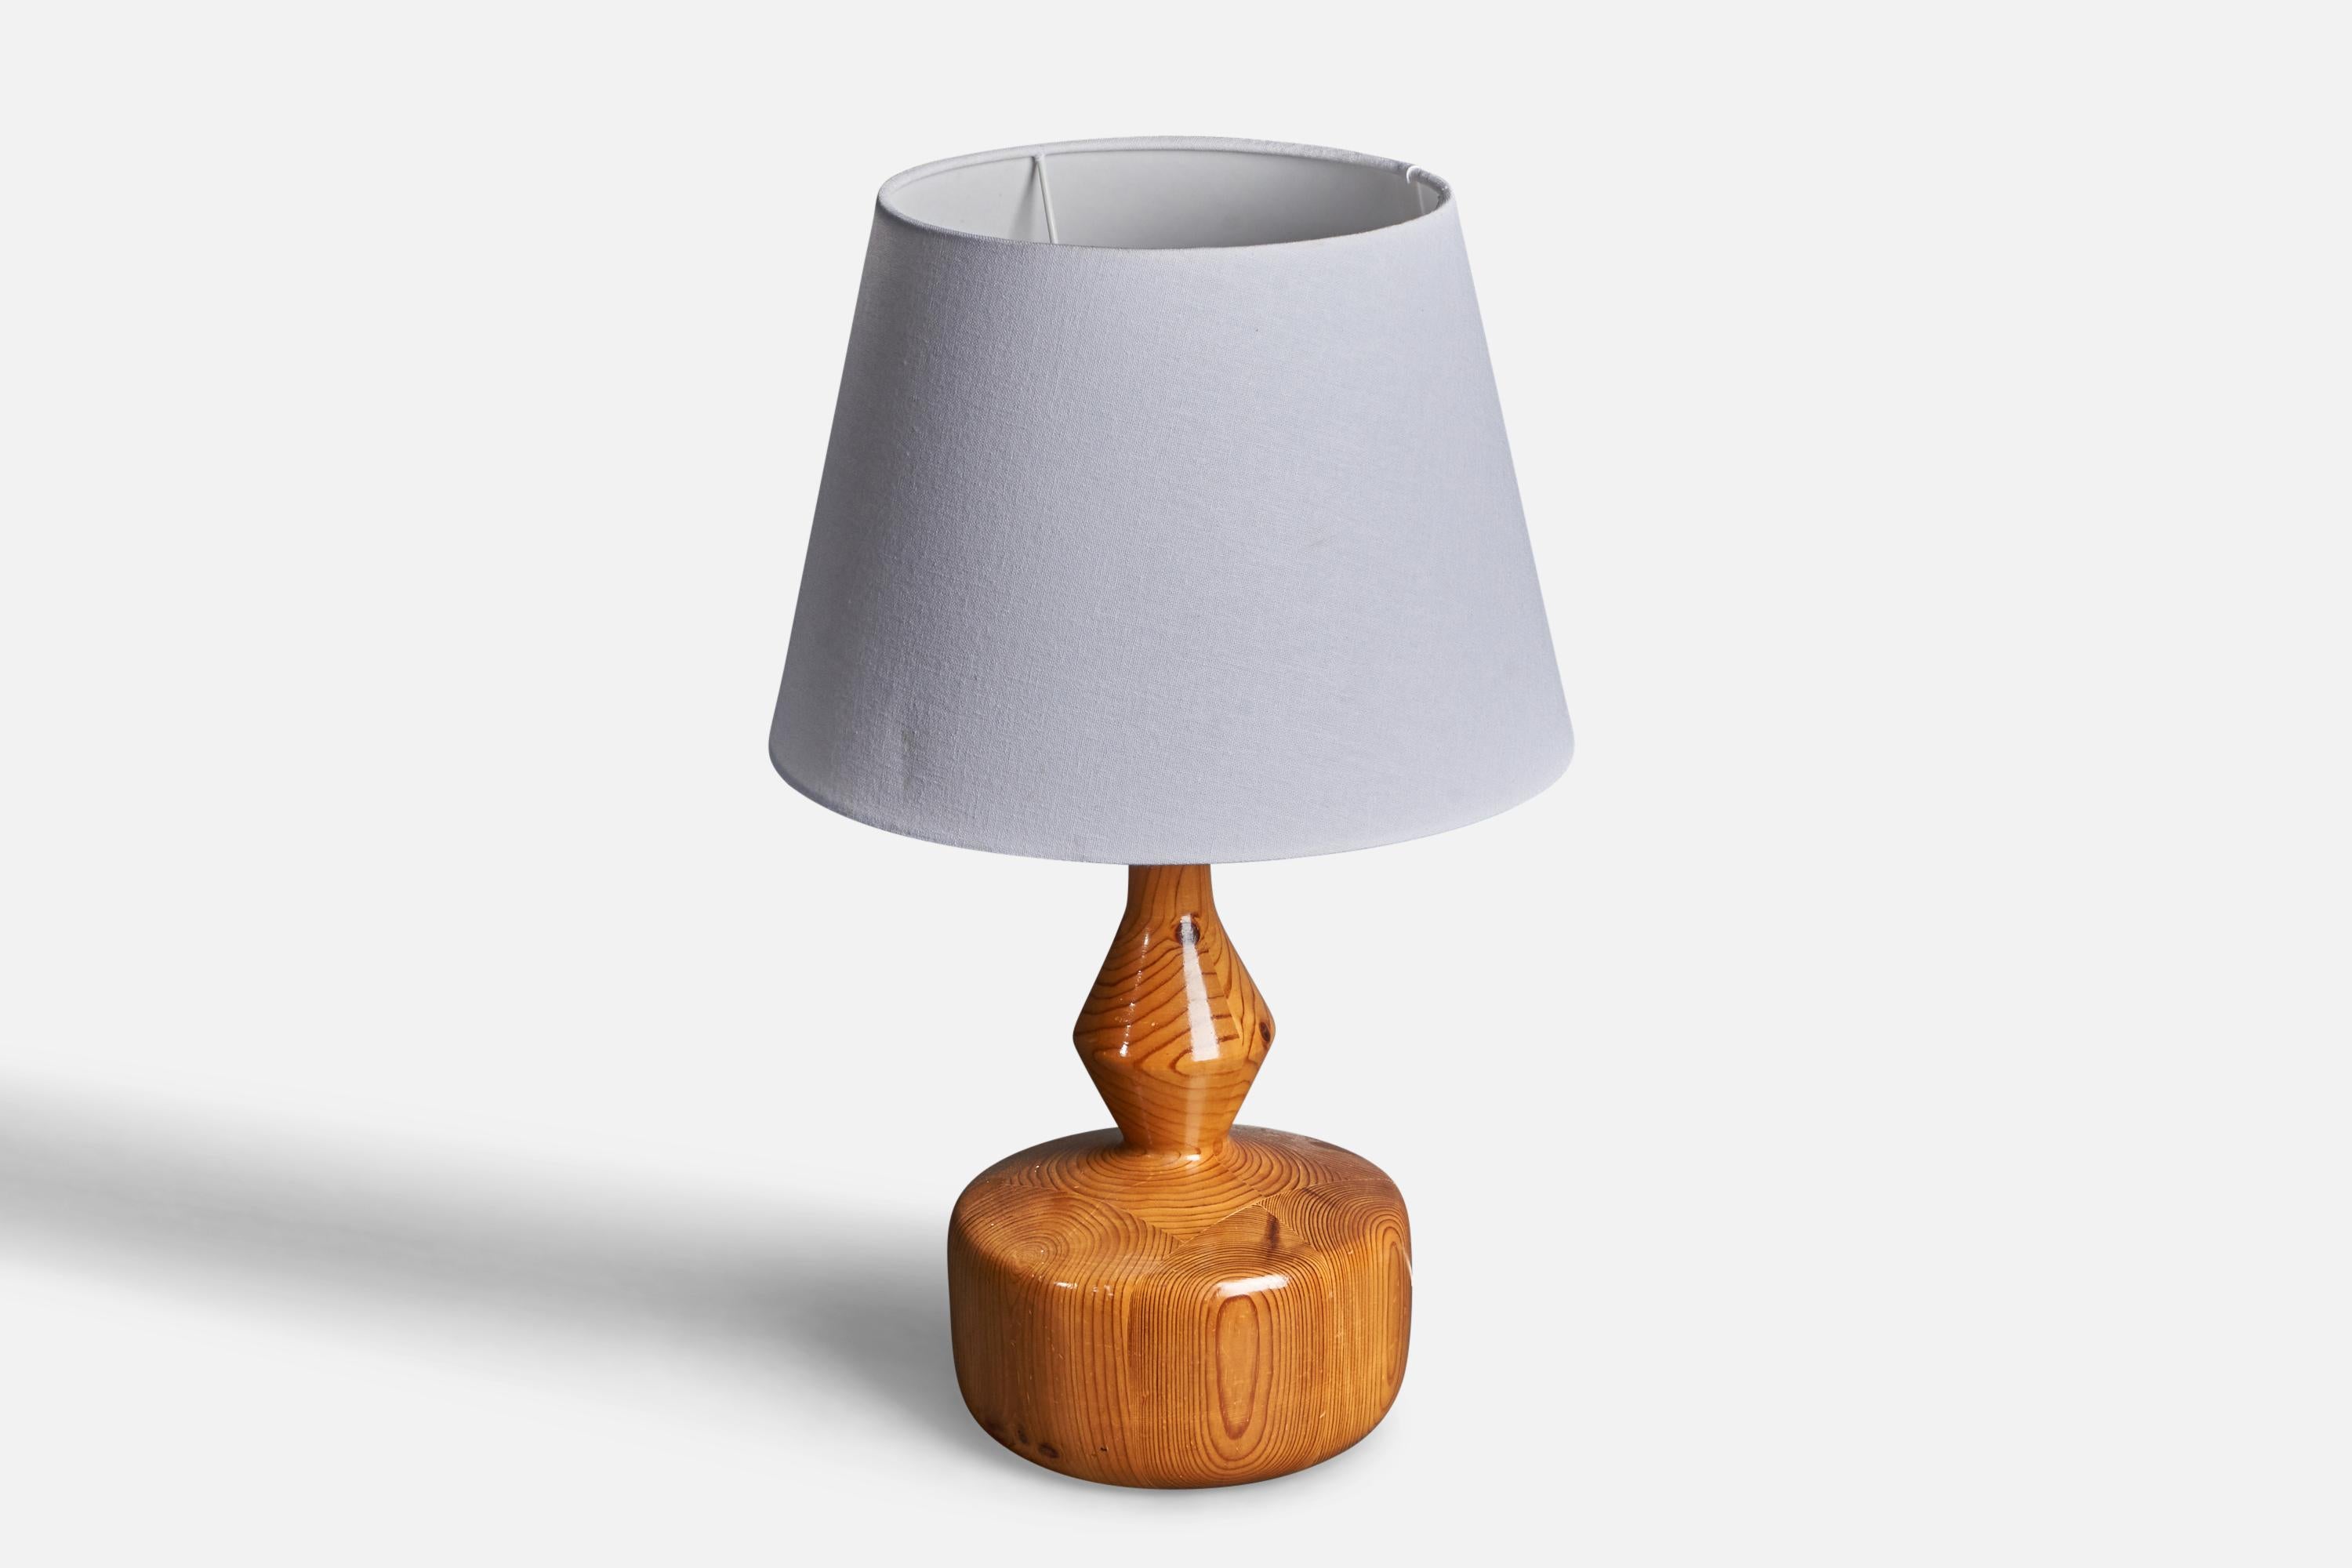 A table lamp designed and produced in Sweden, 1970s. In solid pine. 

Stated dimensions exclude lampshade. Height includes socket. Sold without lampshade.

Stated dimensions exlude lampshade, height includes socket. Upon request a vintage rattan